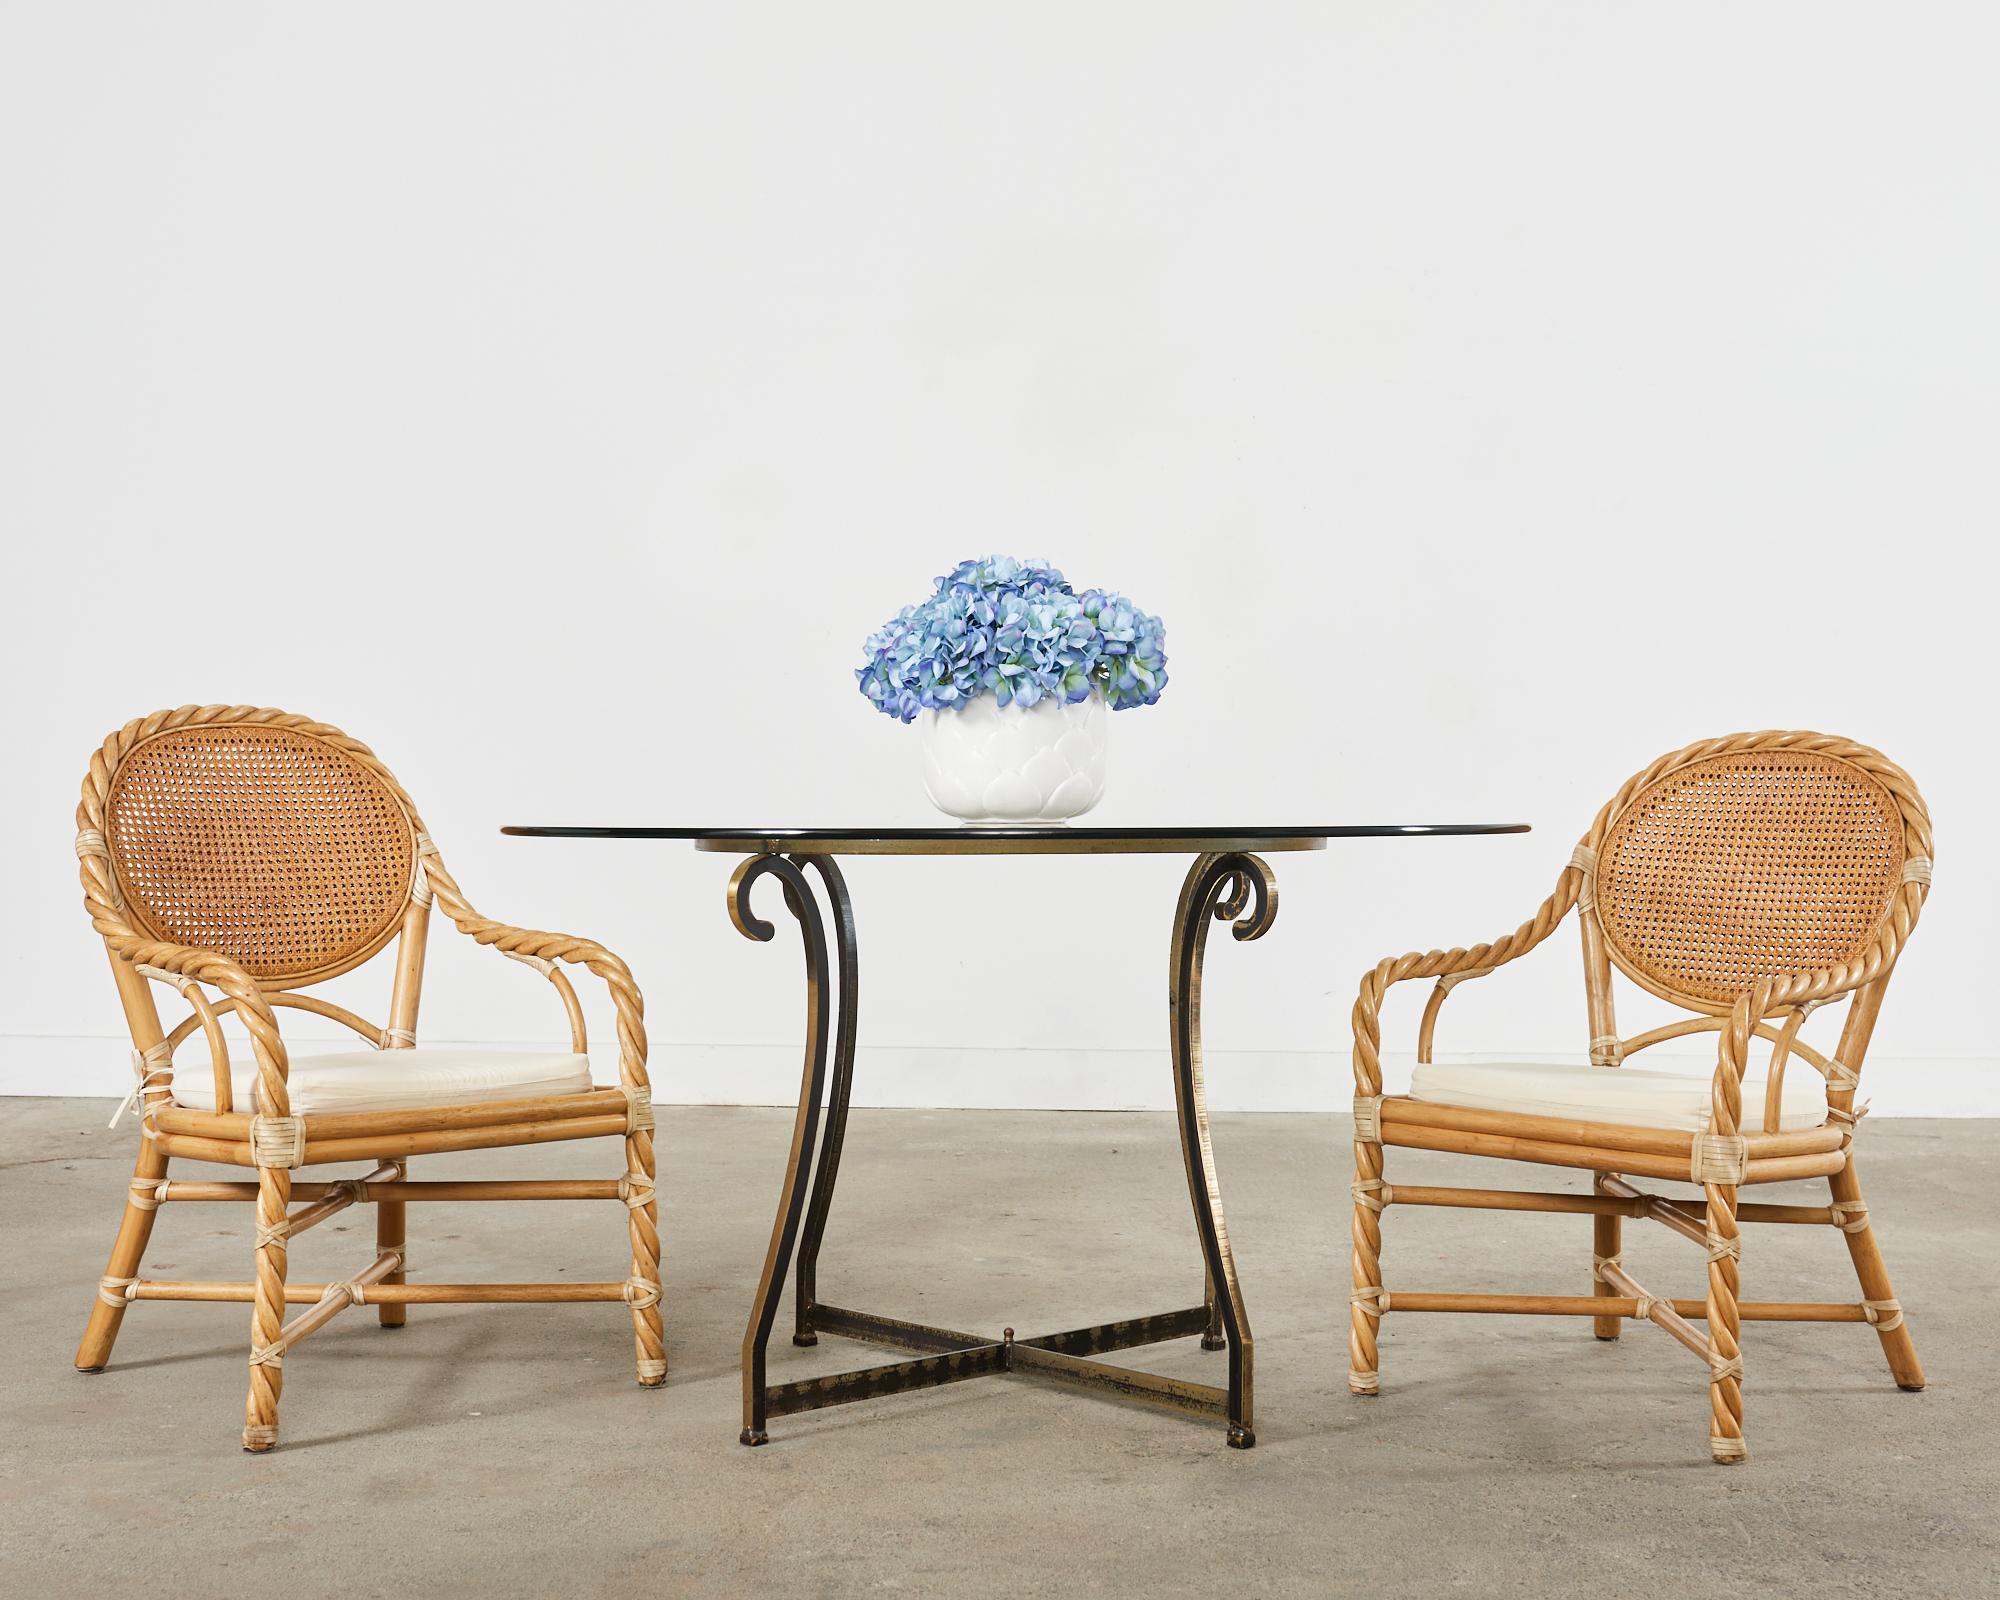 Amazing set of four twisted rattan dining armchairs made in the California coastal organic modern style by McGuire, San Francisco. The bespoke chairs feature a braided pole rattan frame that starts at the legs, then becomes the arms, and gracefully